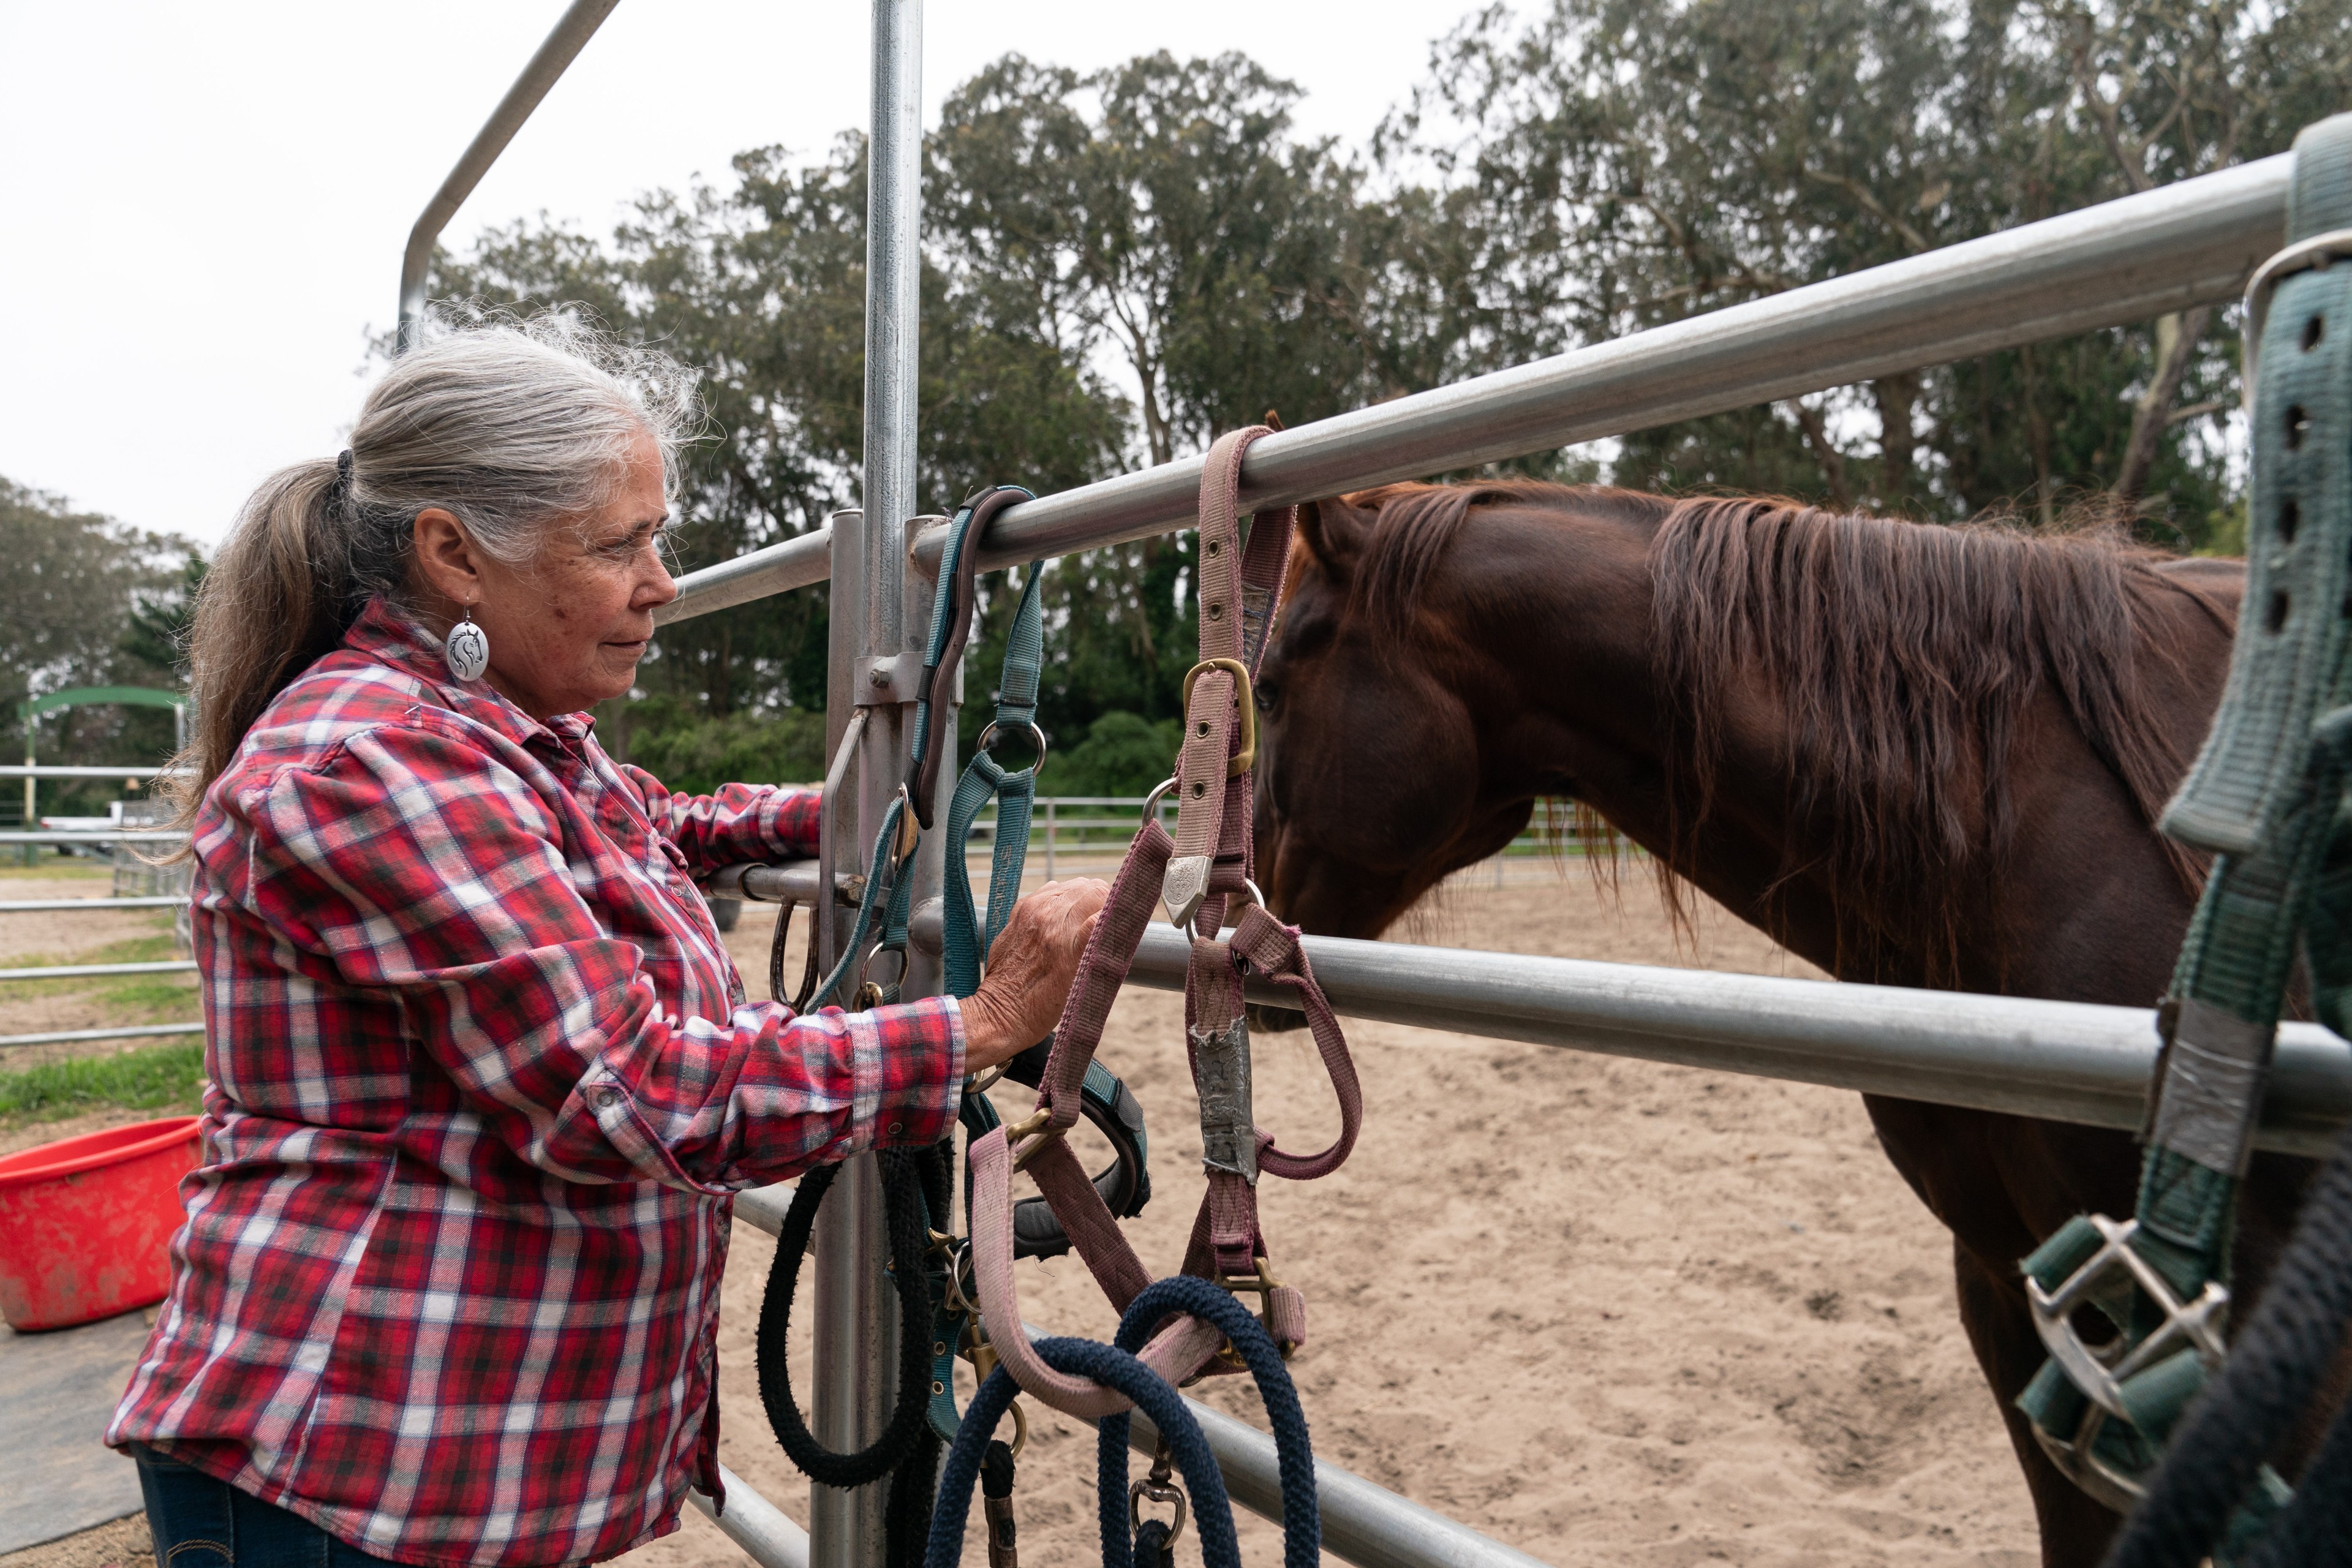 An elderly woman in a plaid shirt adjusts a horse's halter near a metal fence, with trees in the background.